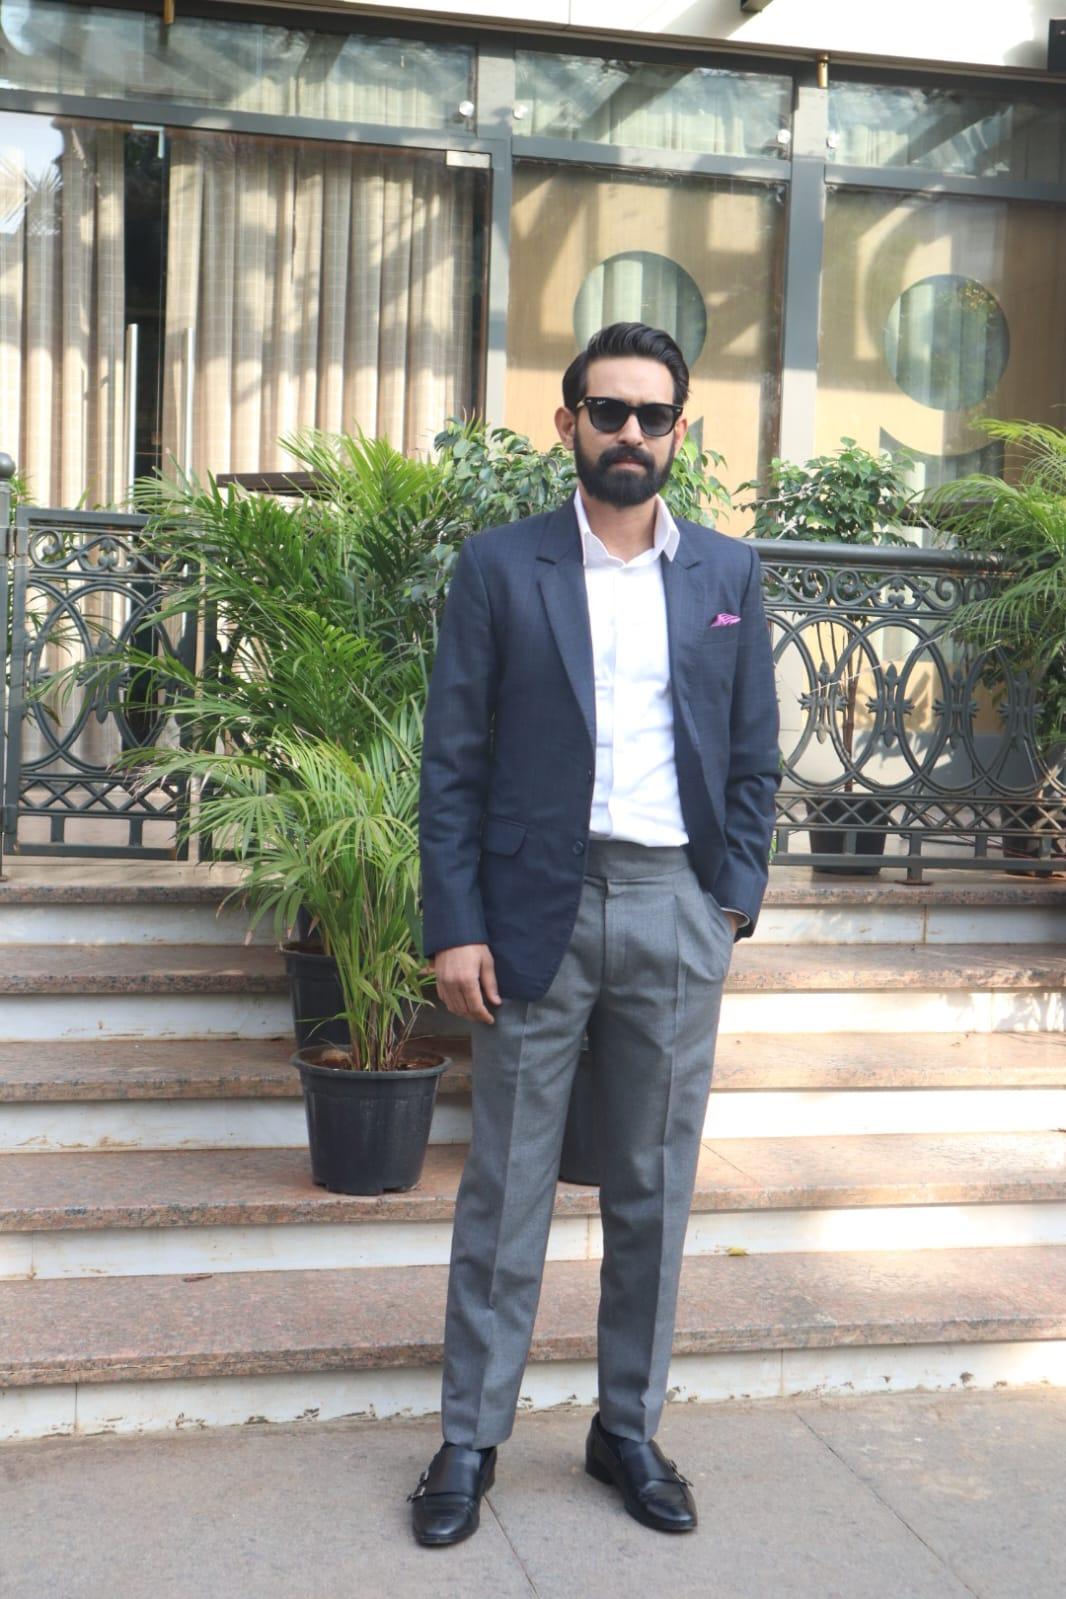 Vikrant Messy looked dashing in formal wear as the actor went out and about in the city